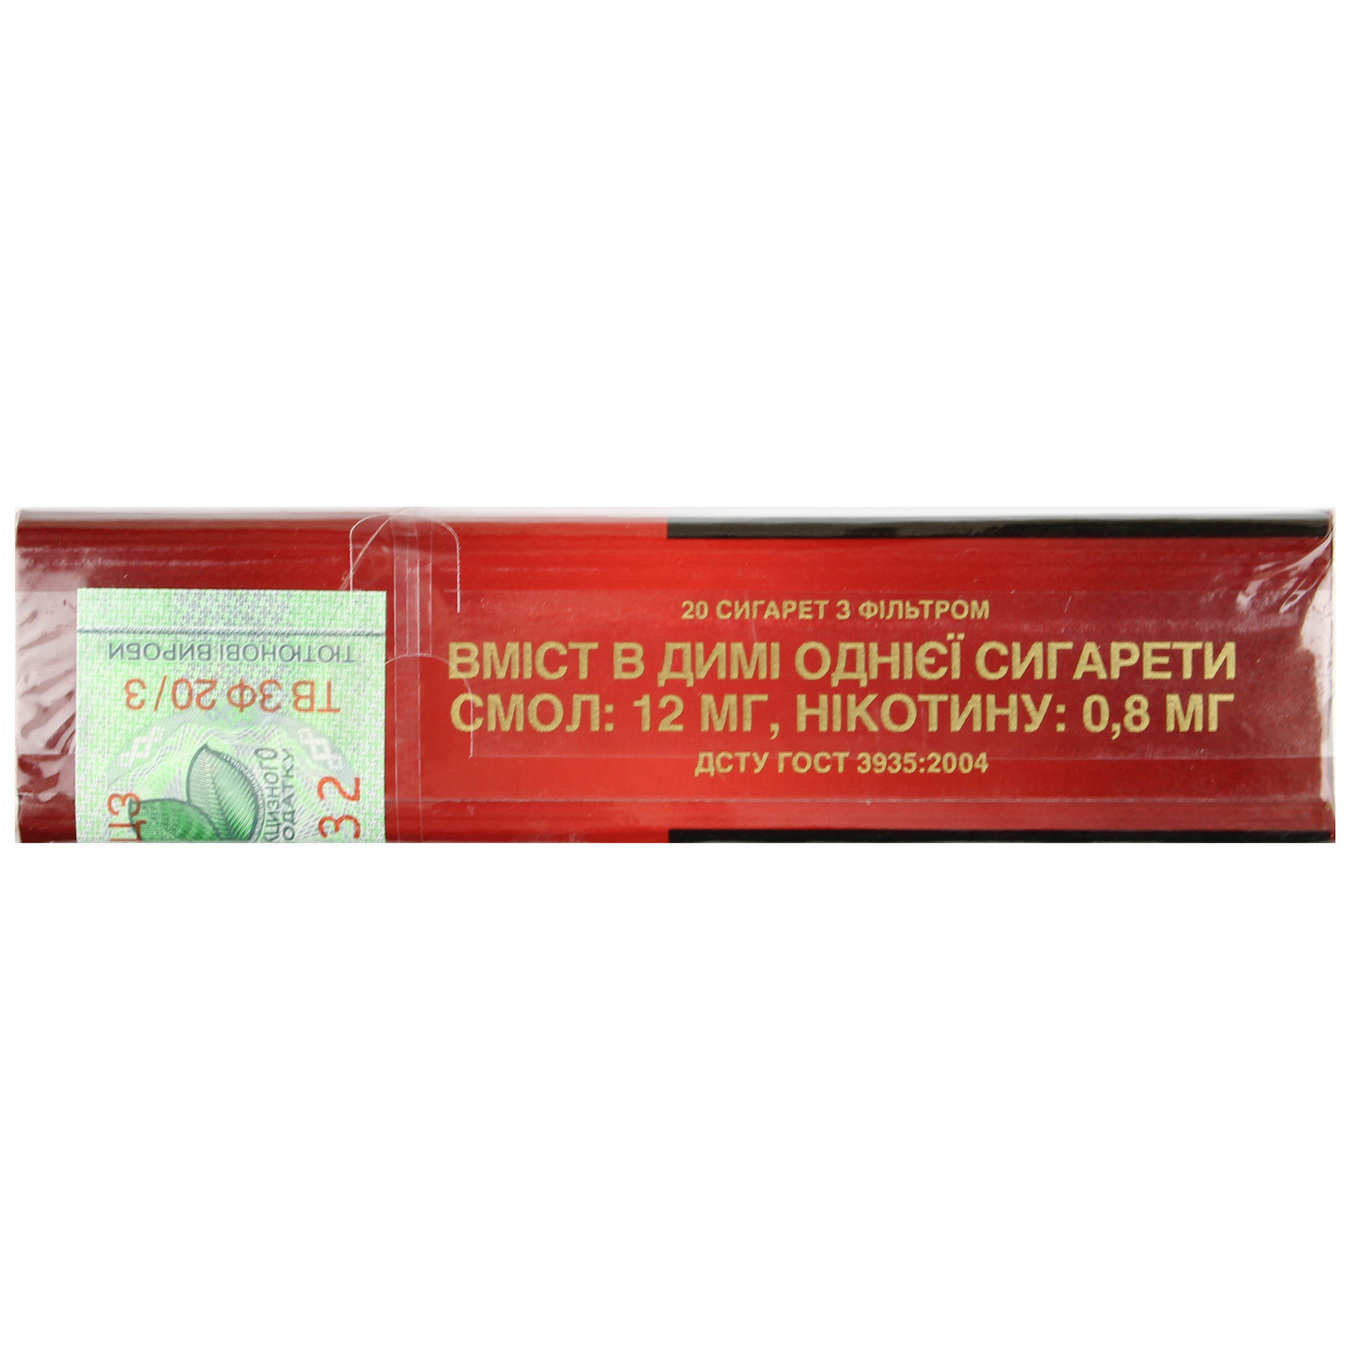 Priluki Classic Cigarettes 20 pcs (the price is indicated without excise tax) 2